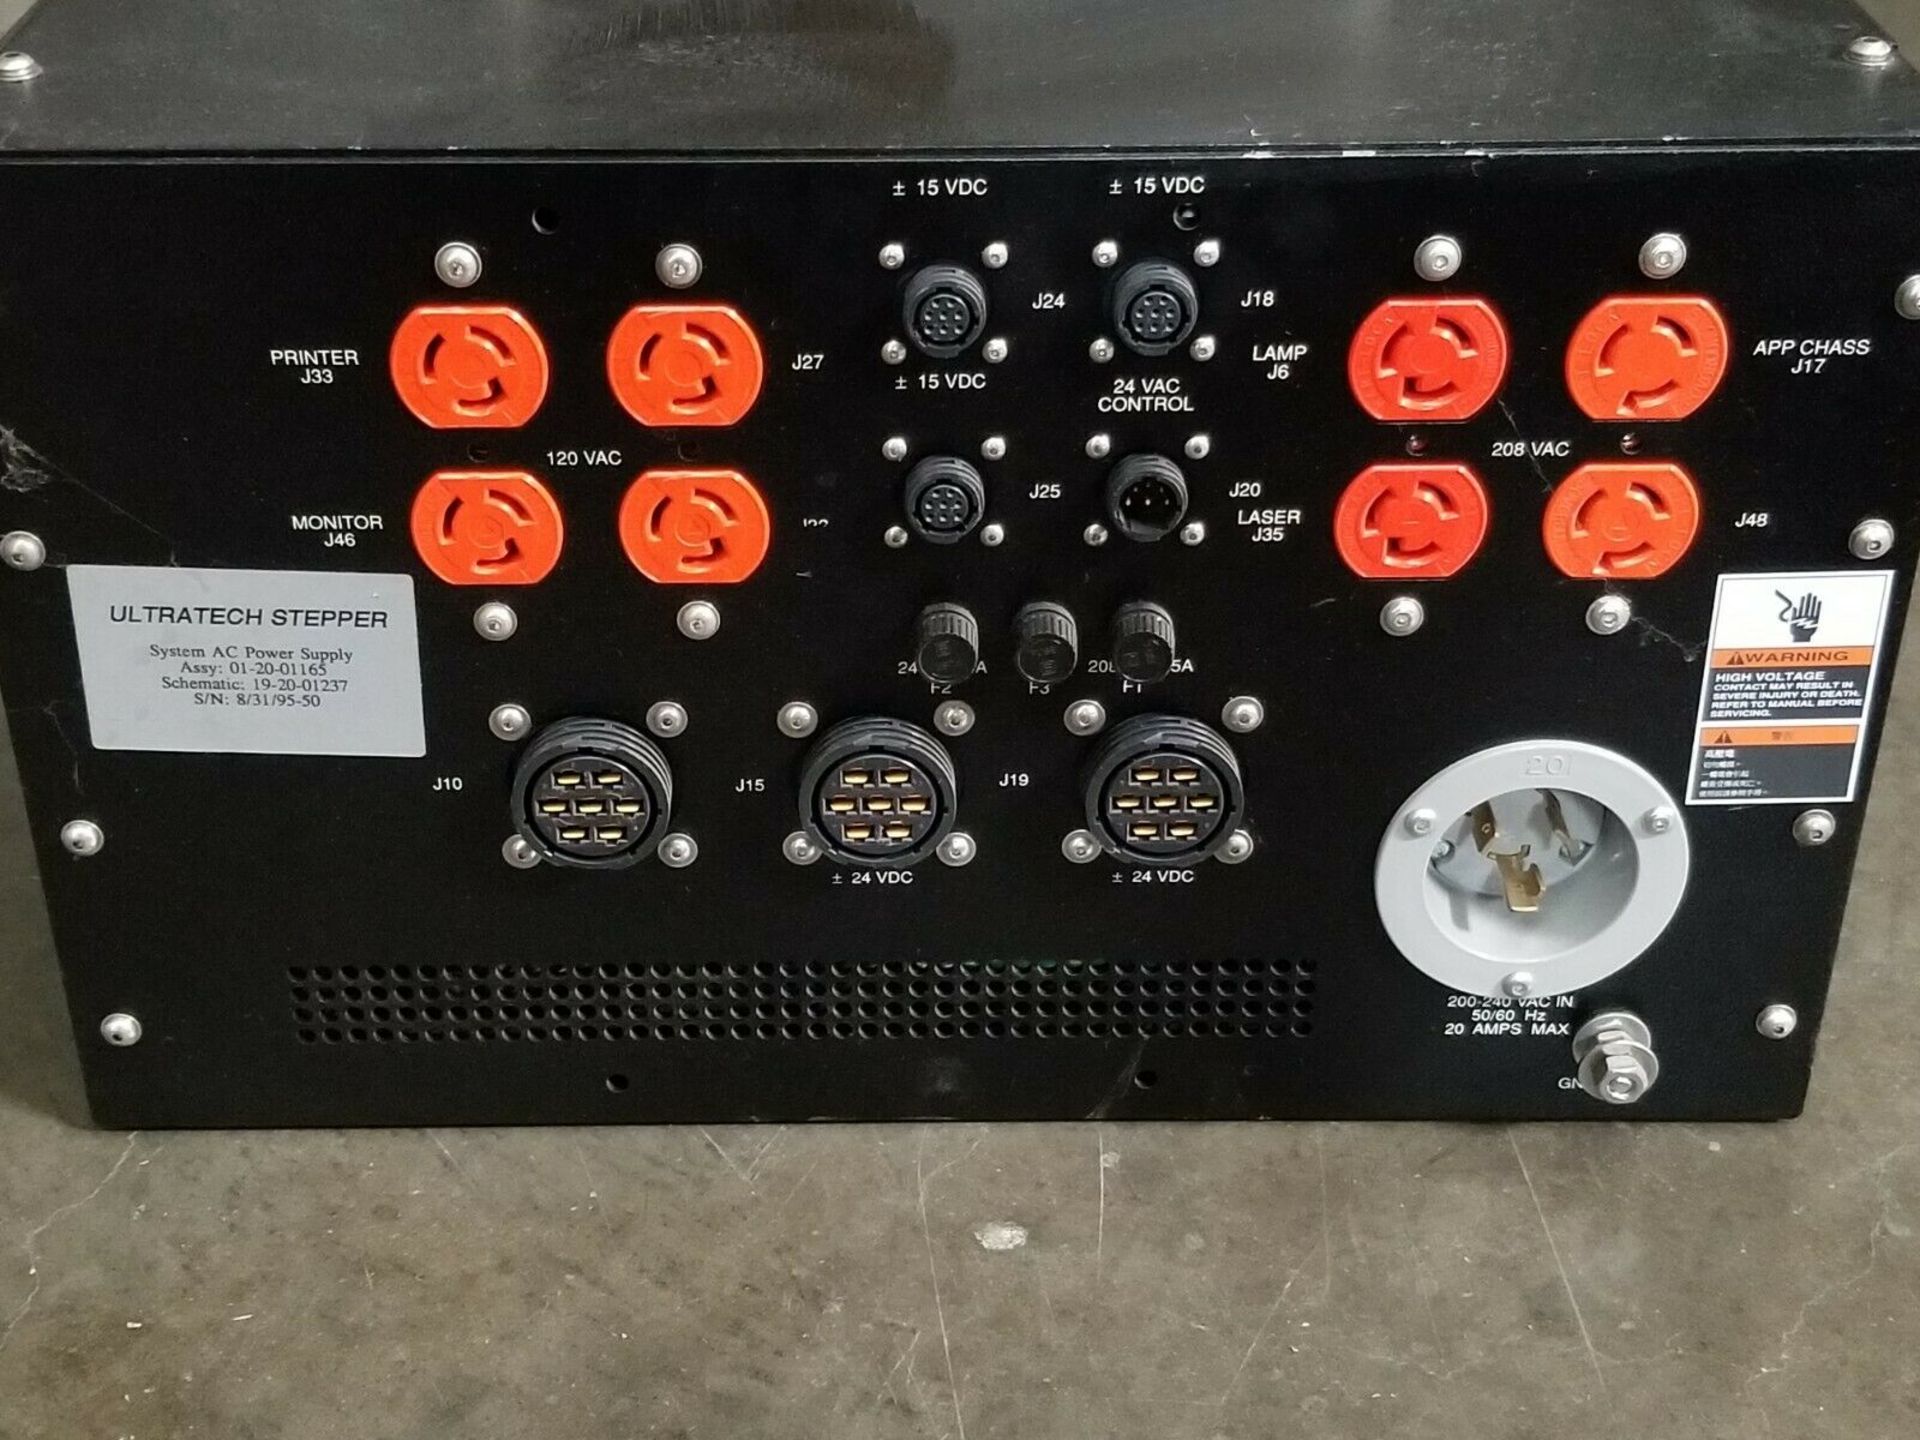 Ultratech Stepper System AC Power Supply - Image 4 of 6